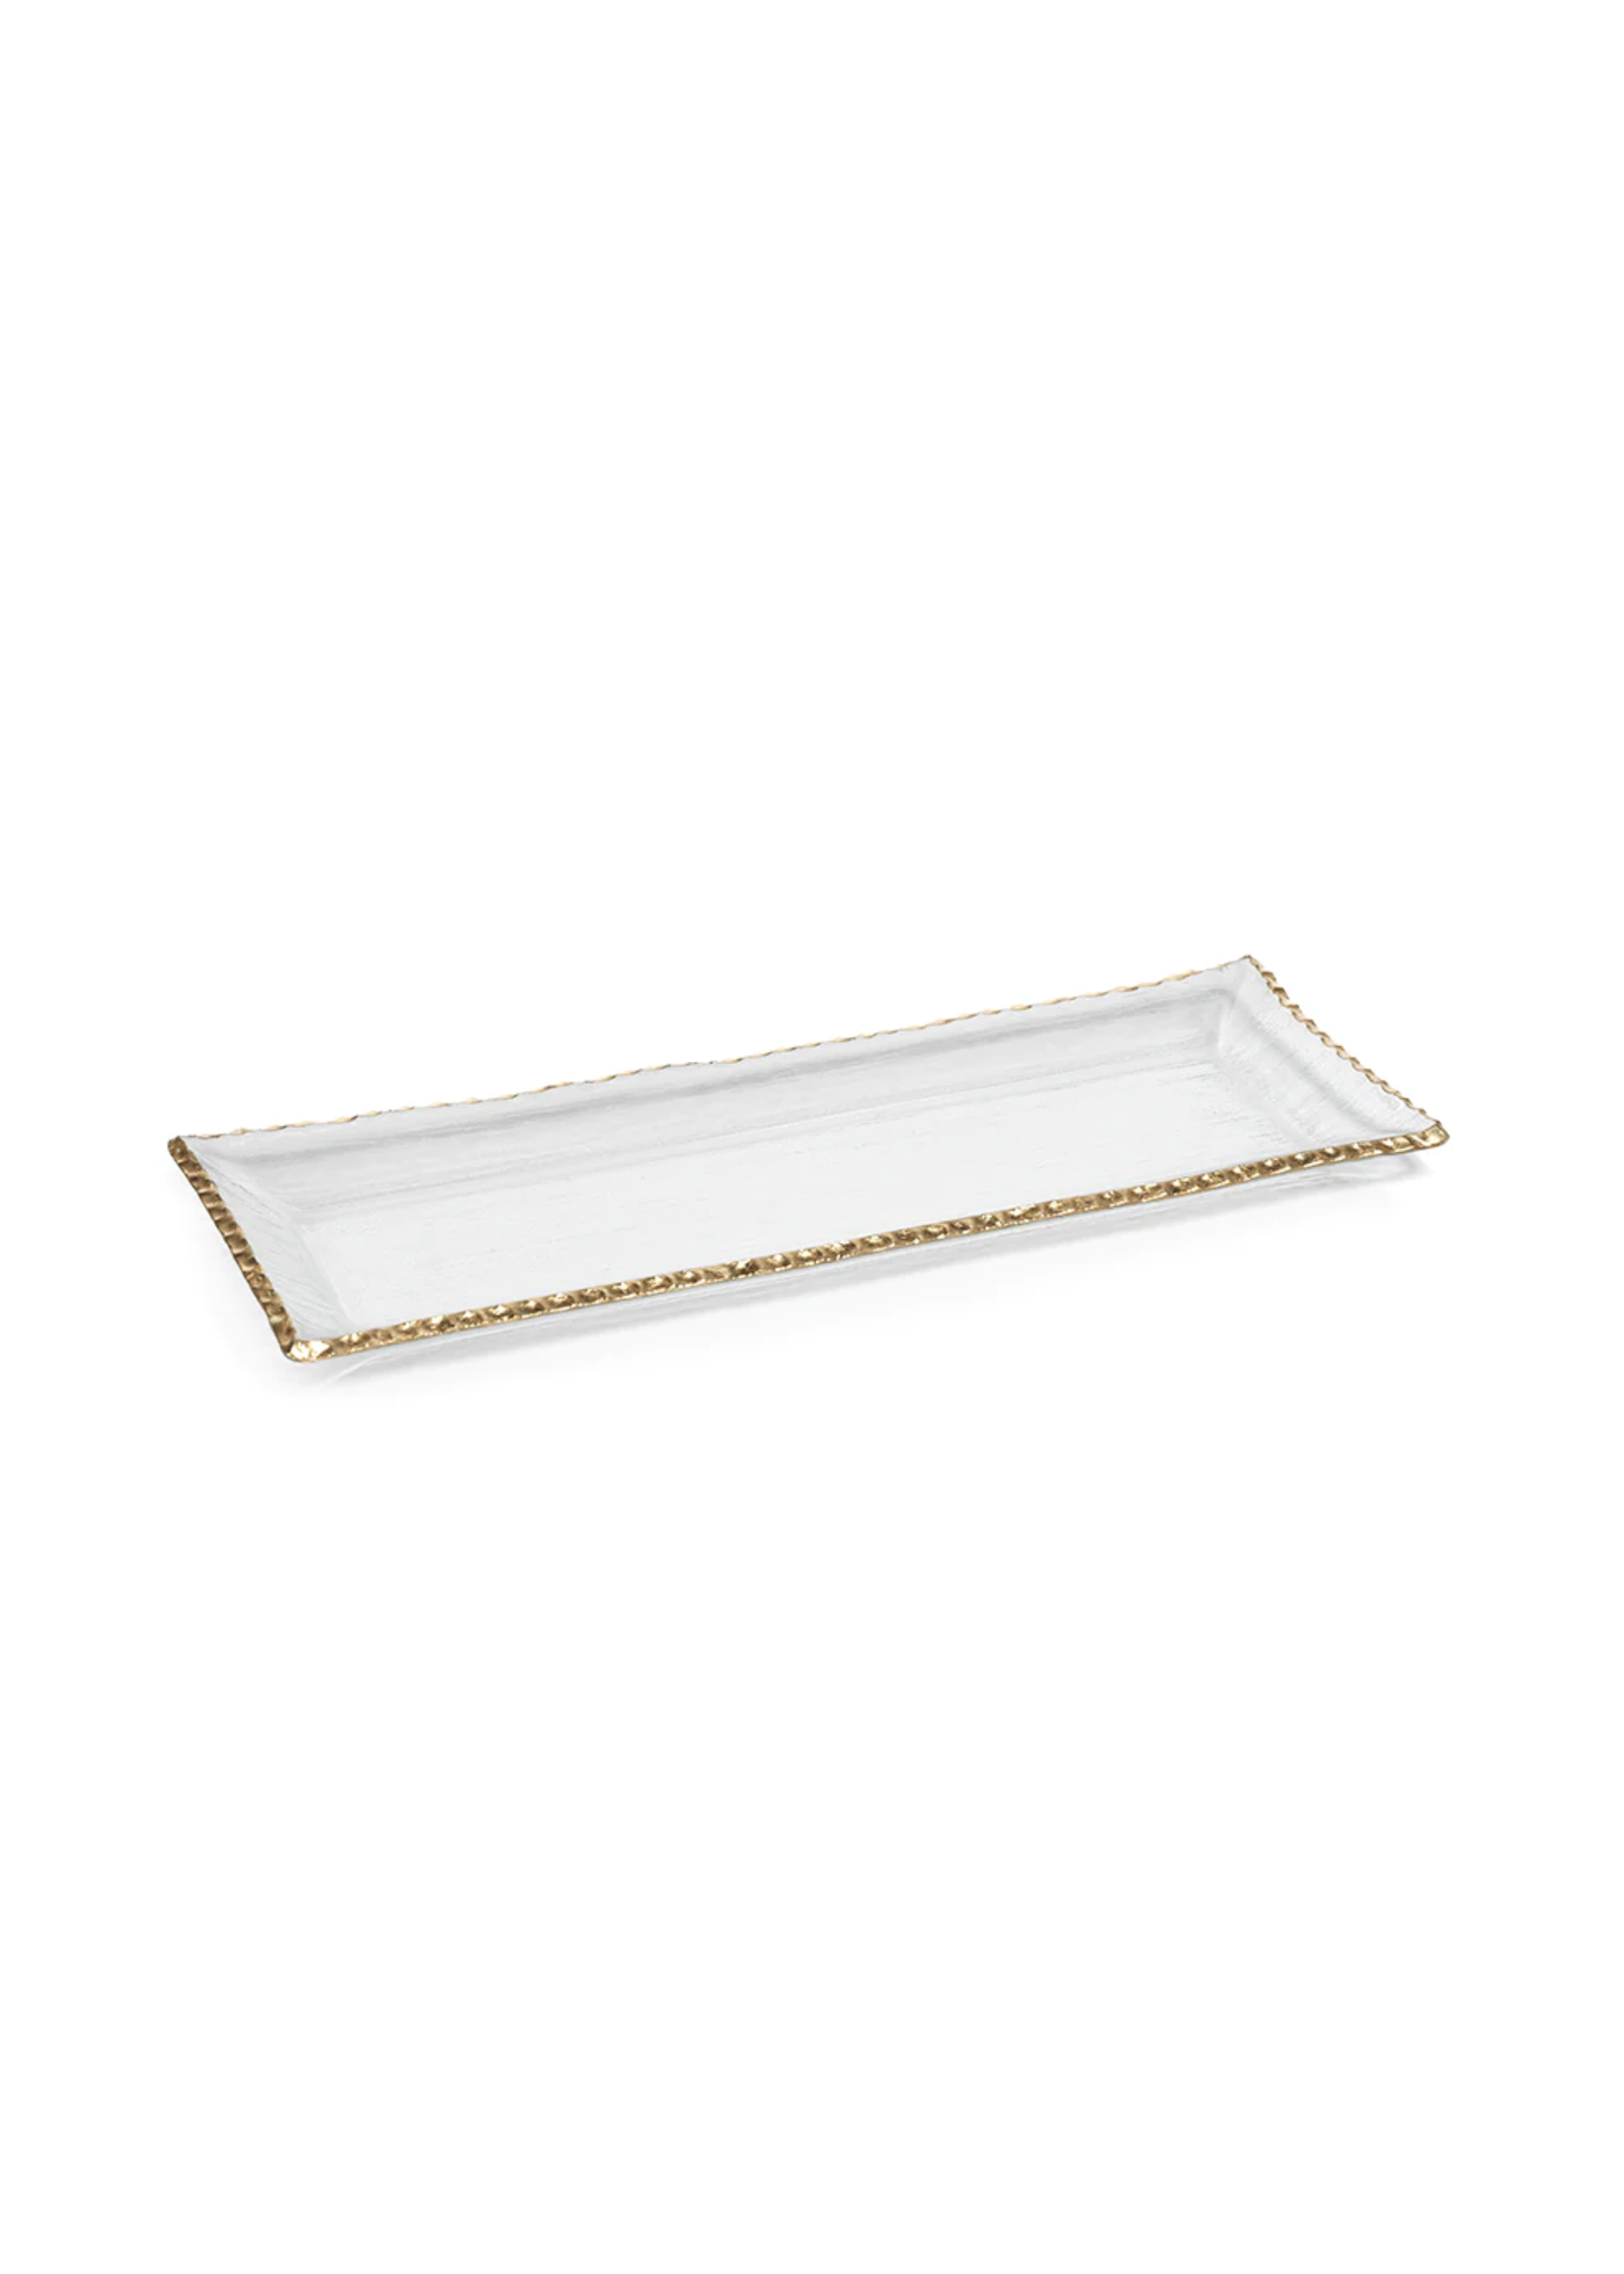 Zodax Clear Textured Rectangular Tray w Jagged Gold Rim - Large